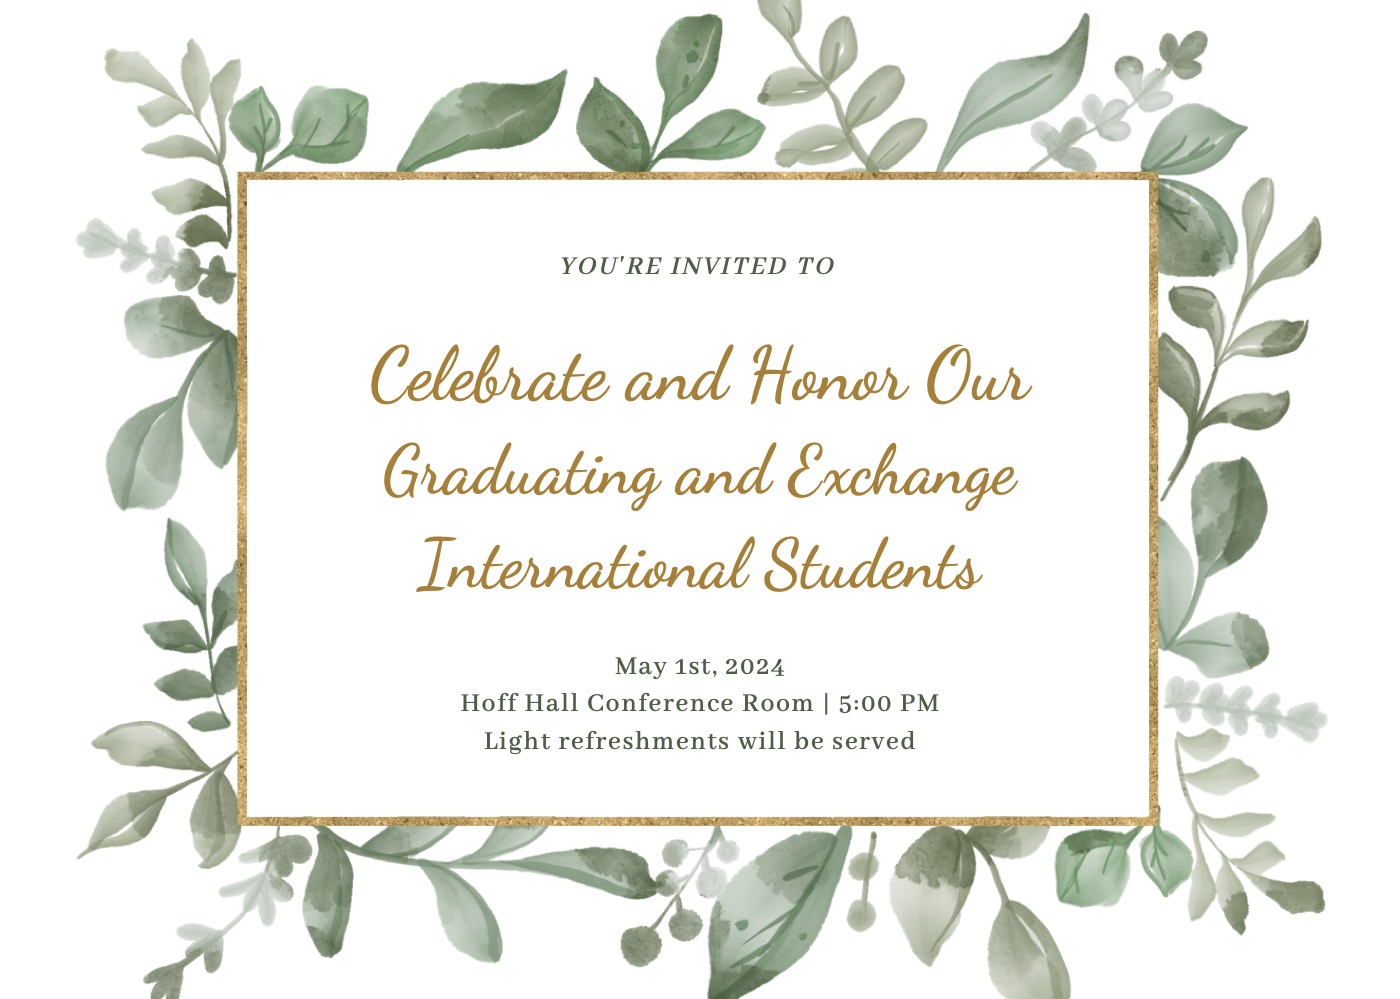 Celebrate and Honor Our Graduating and Exchange International Students!